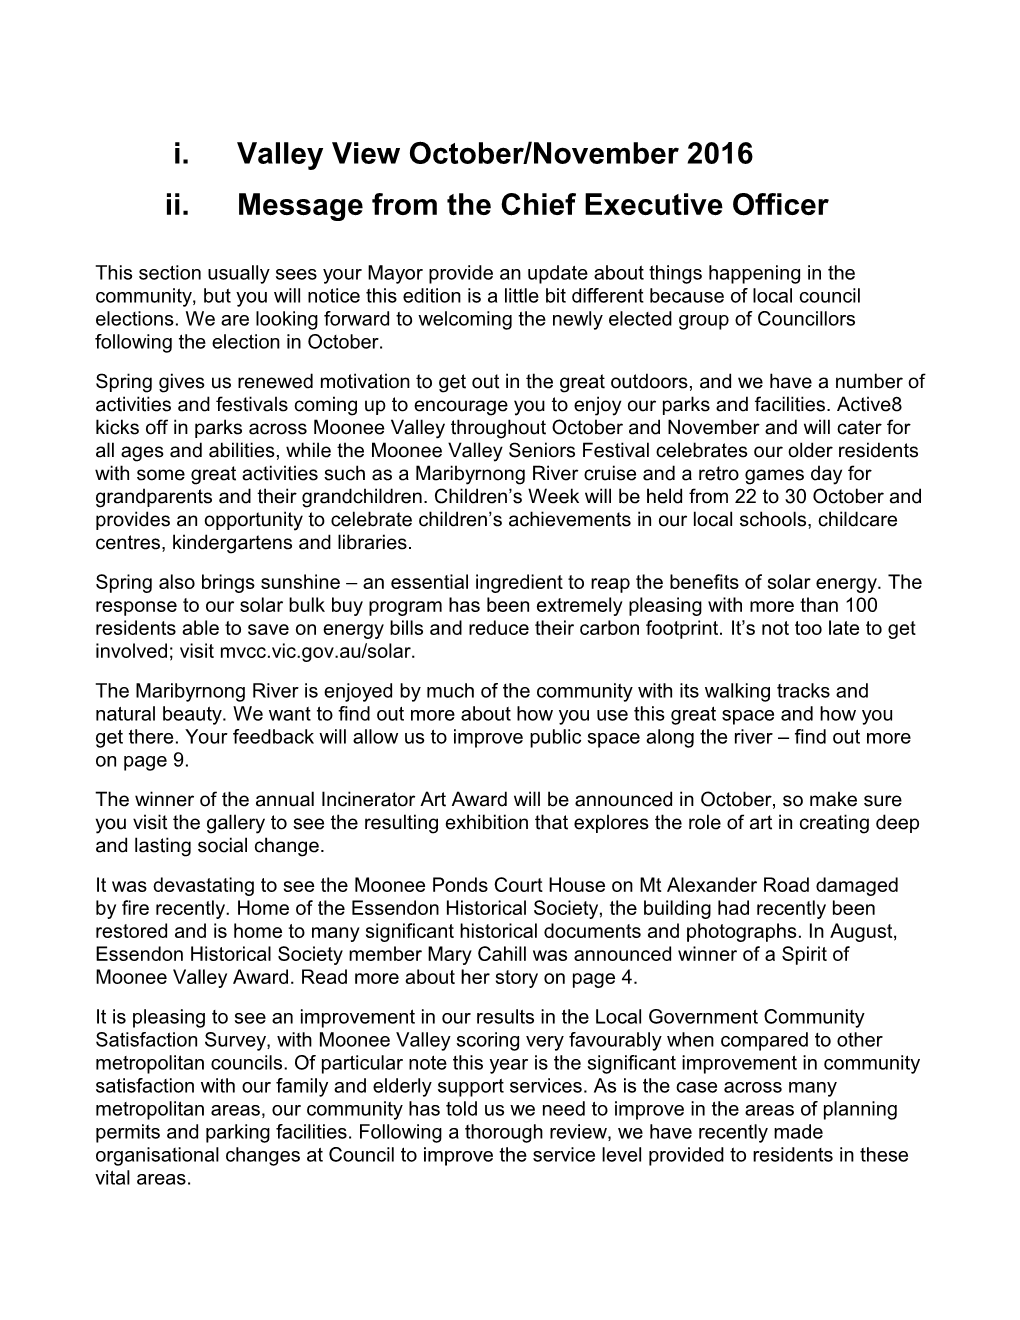 Message from the Chief Executiveofficer